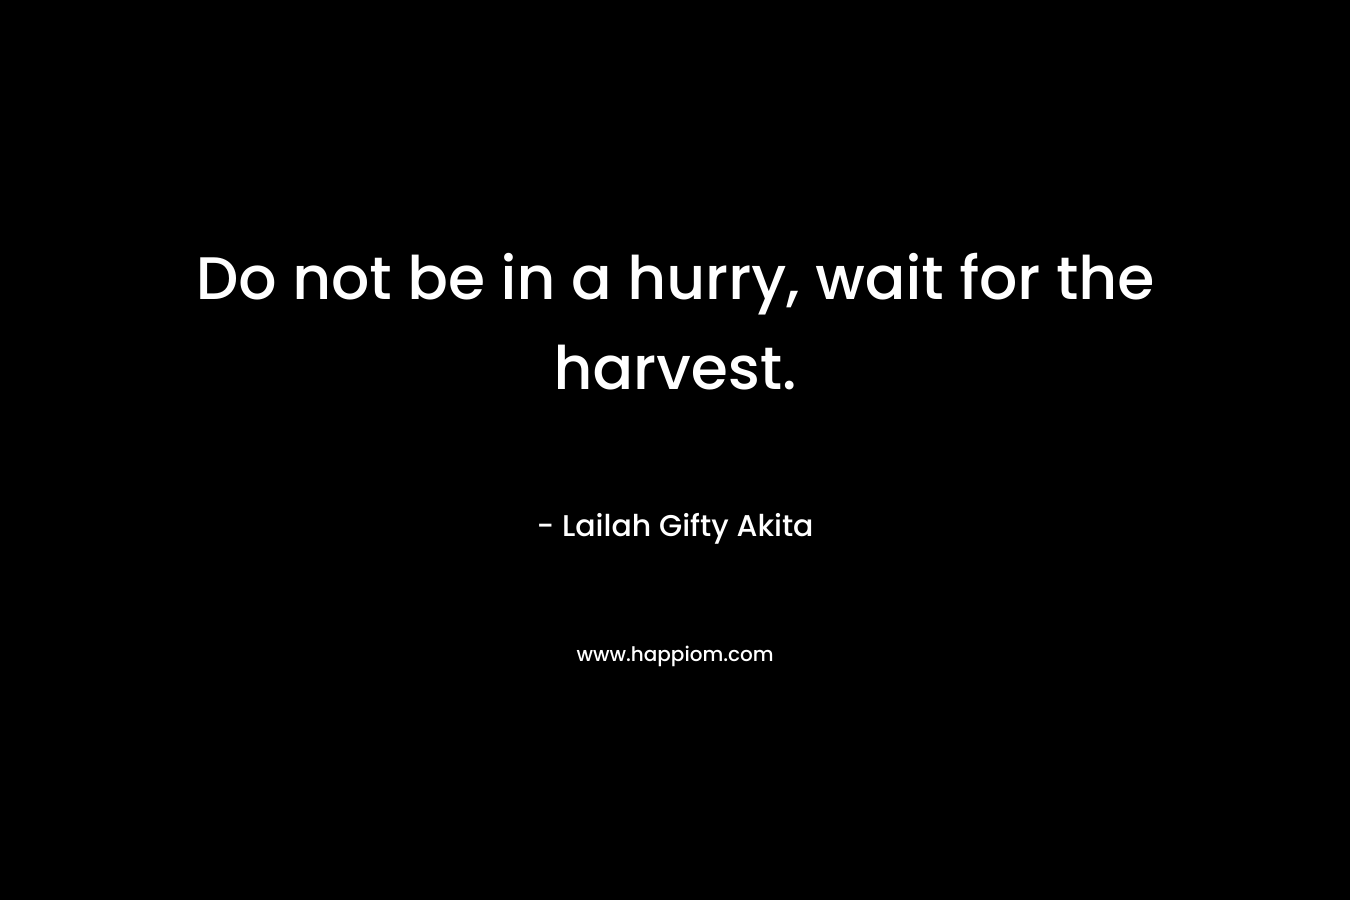 Do not be in a hurry, wait for the harvest. – Lailah Gifty Akita